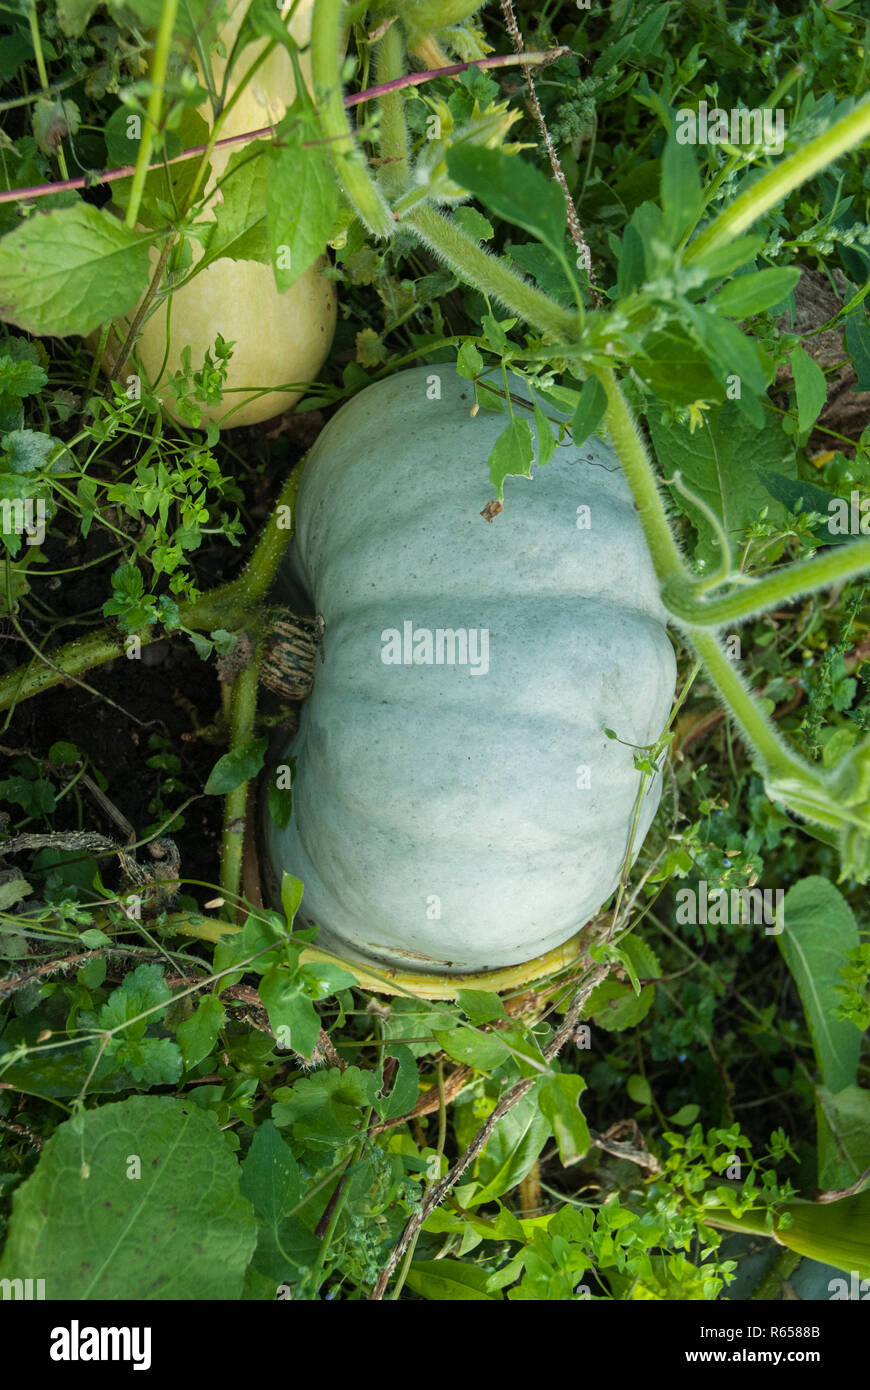 A blue pumpkin 'Crown Prince' growing naturally with foliage Stock Photo